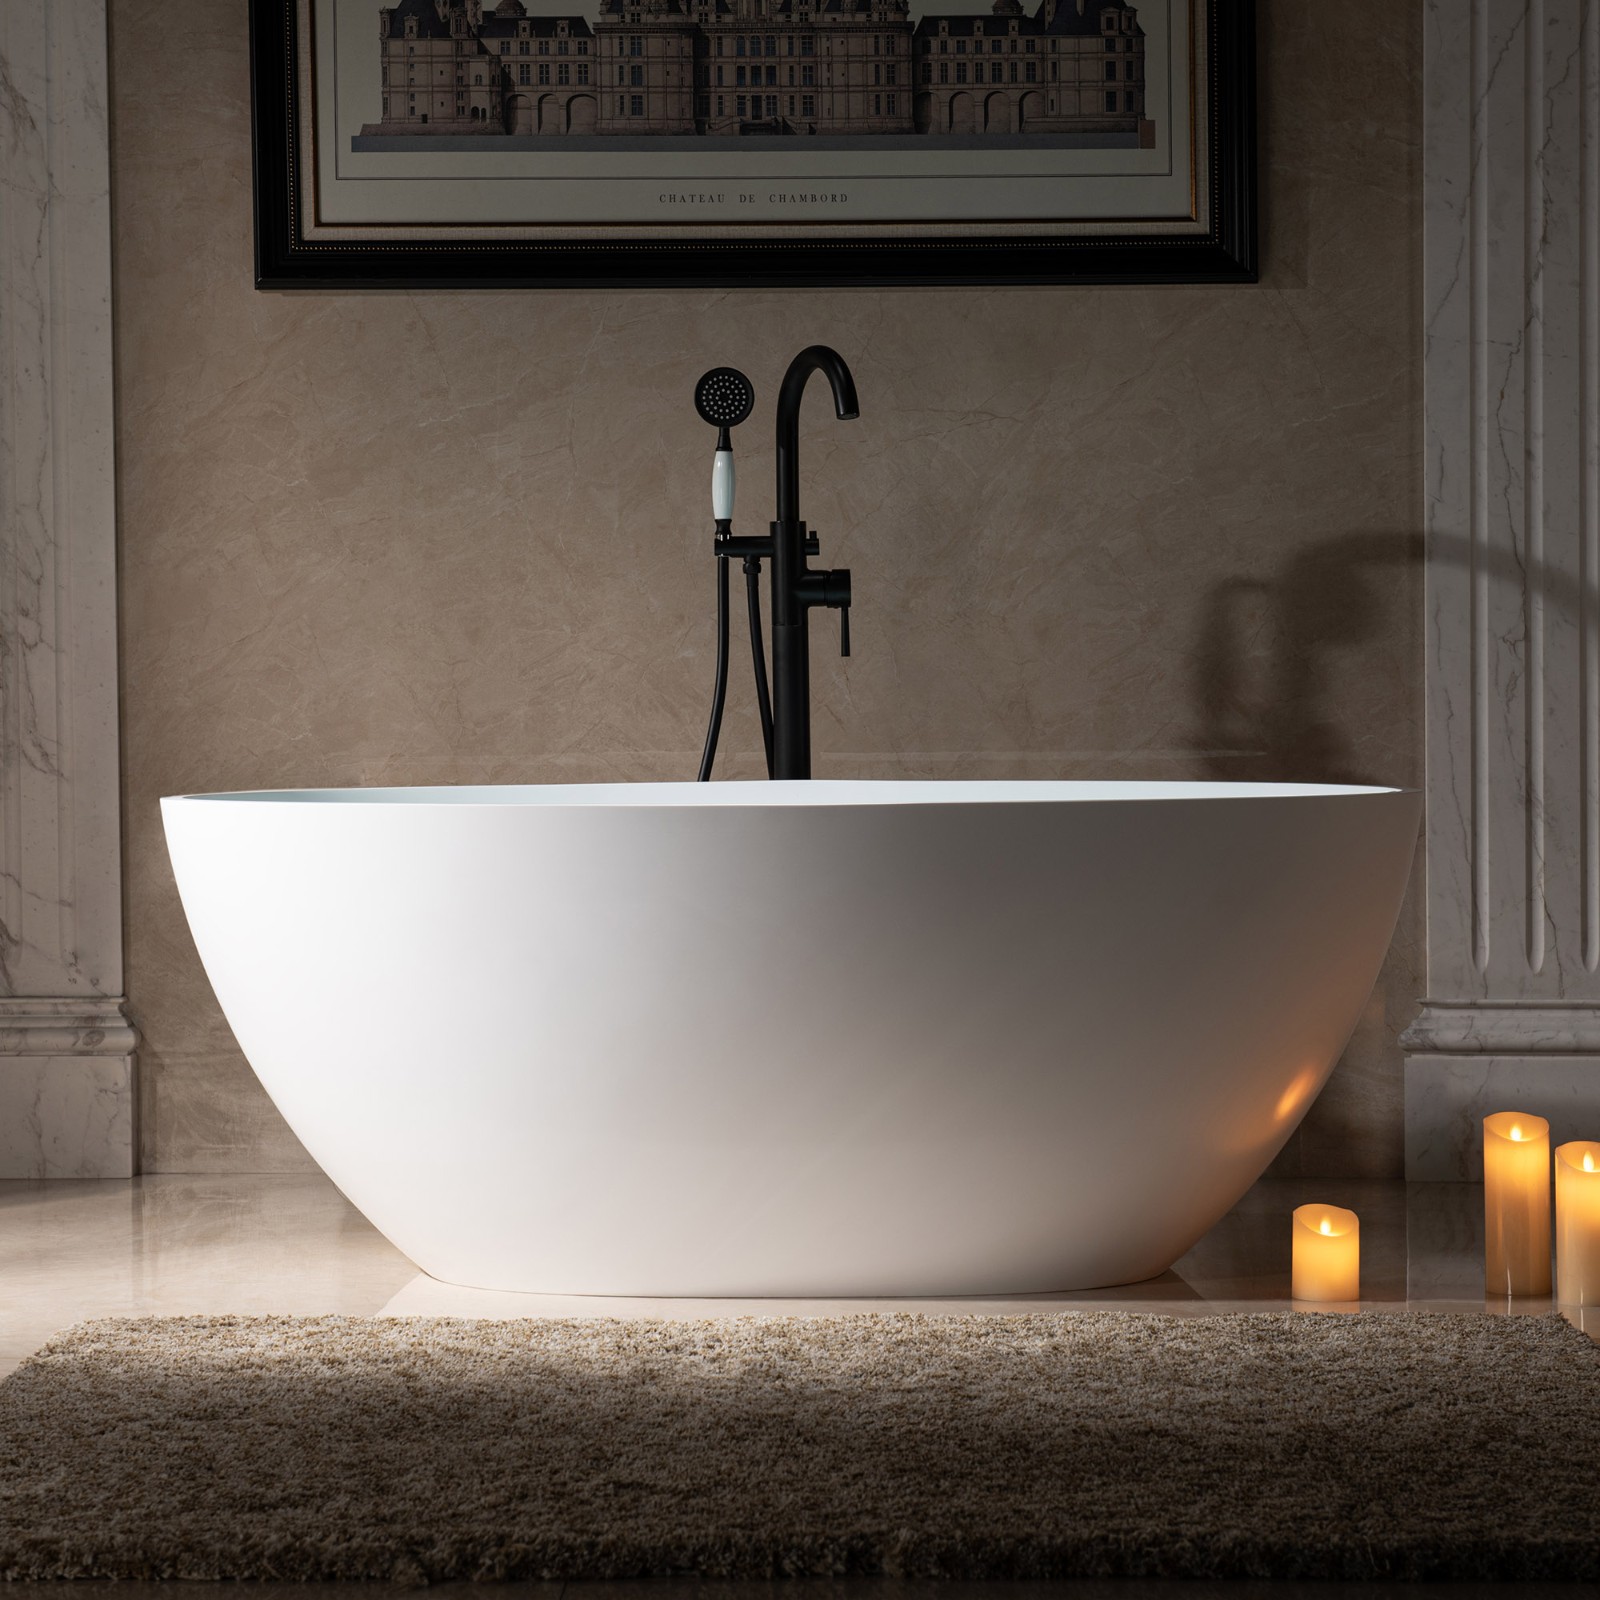  WOODBRIDGE 59 in. x 30.75 in. Luxury Contemporary Solid Surface Freestanding Bathtub in Matte White_614